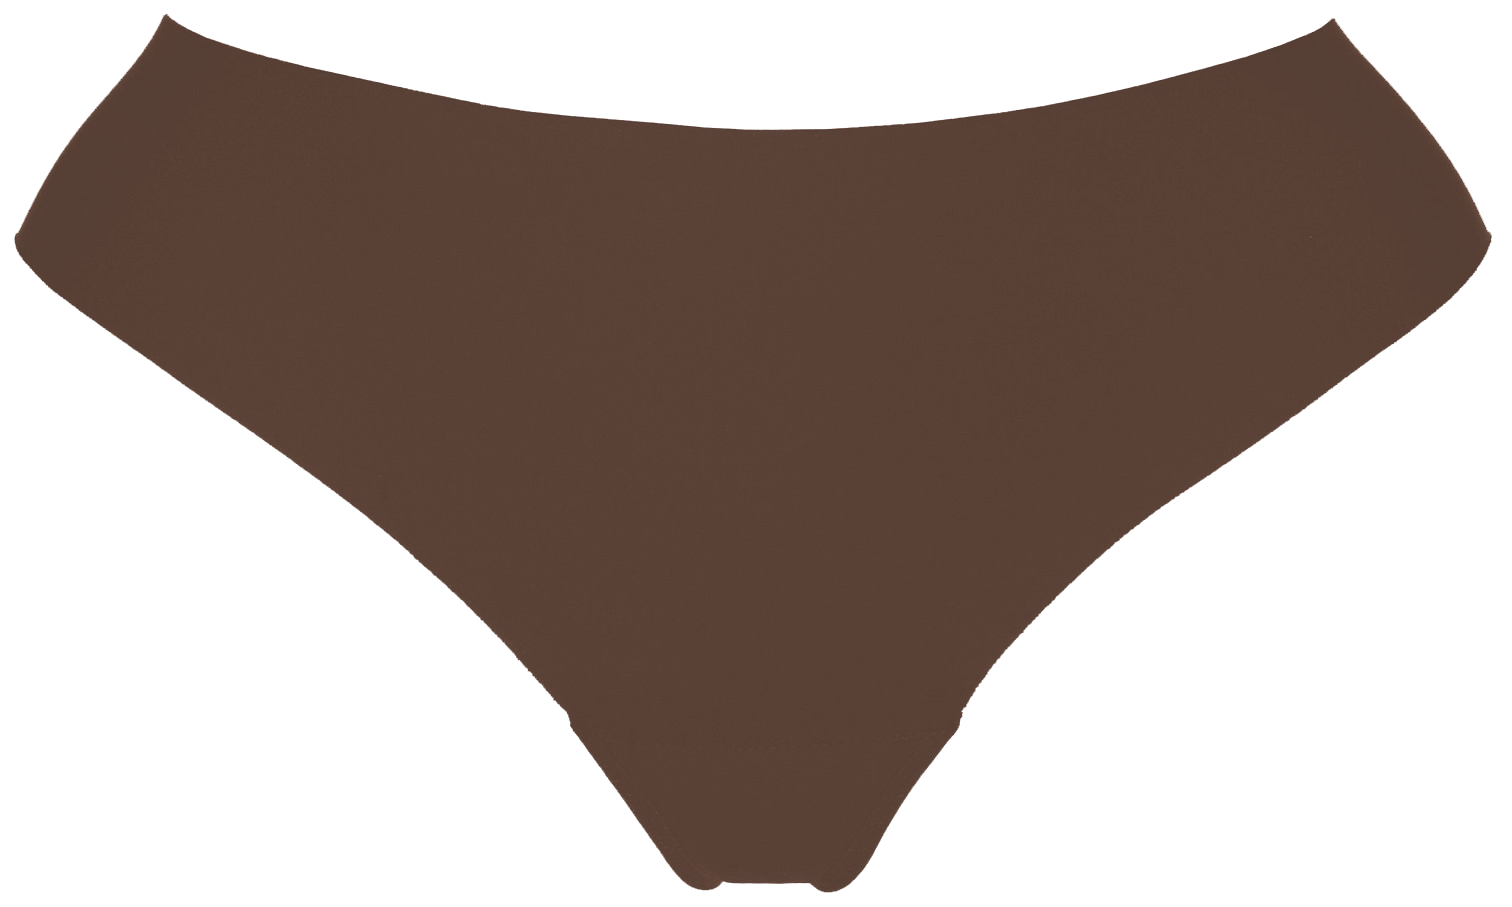 Camel Proof ECO Mid Rise Thong